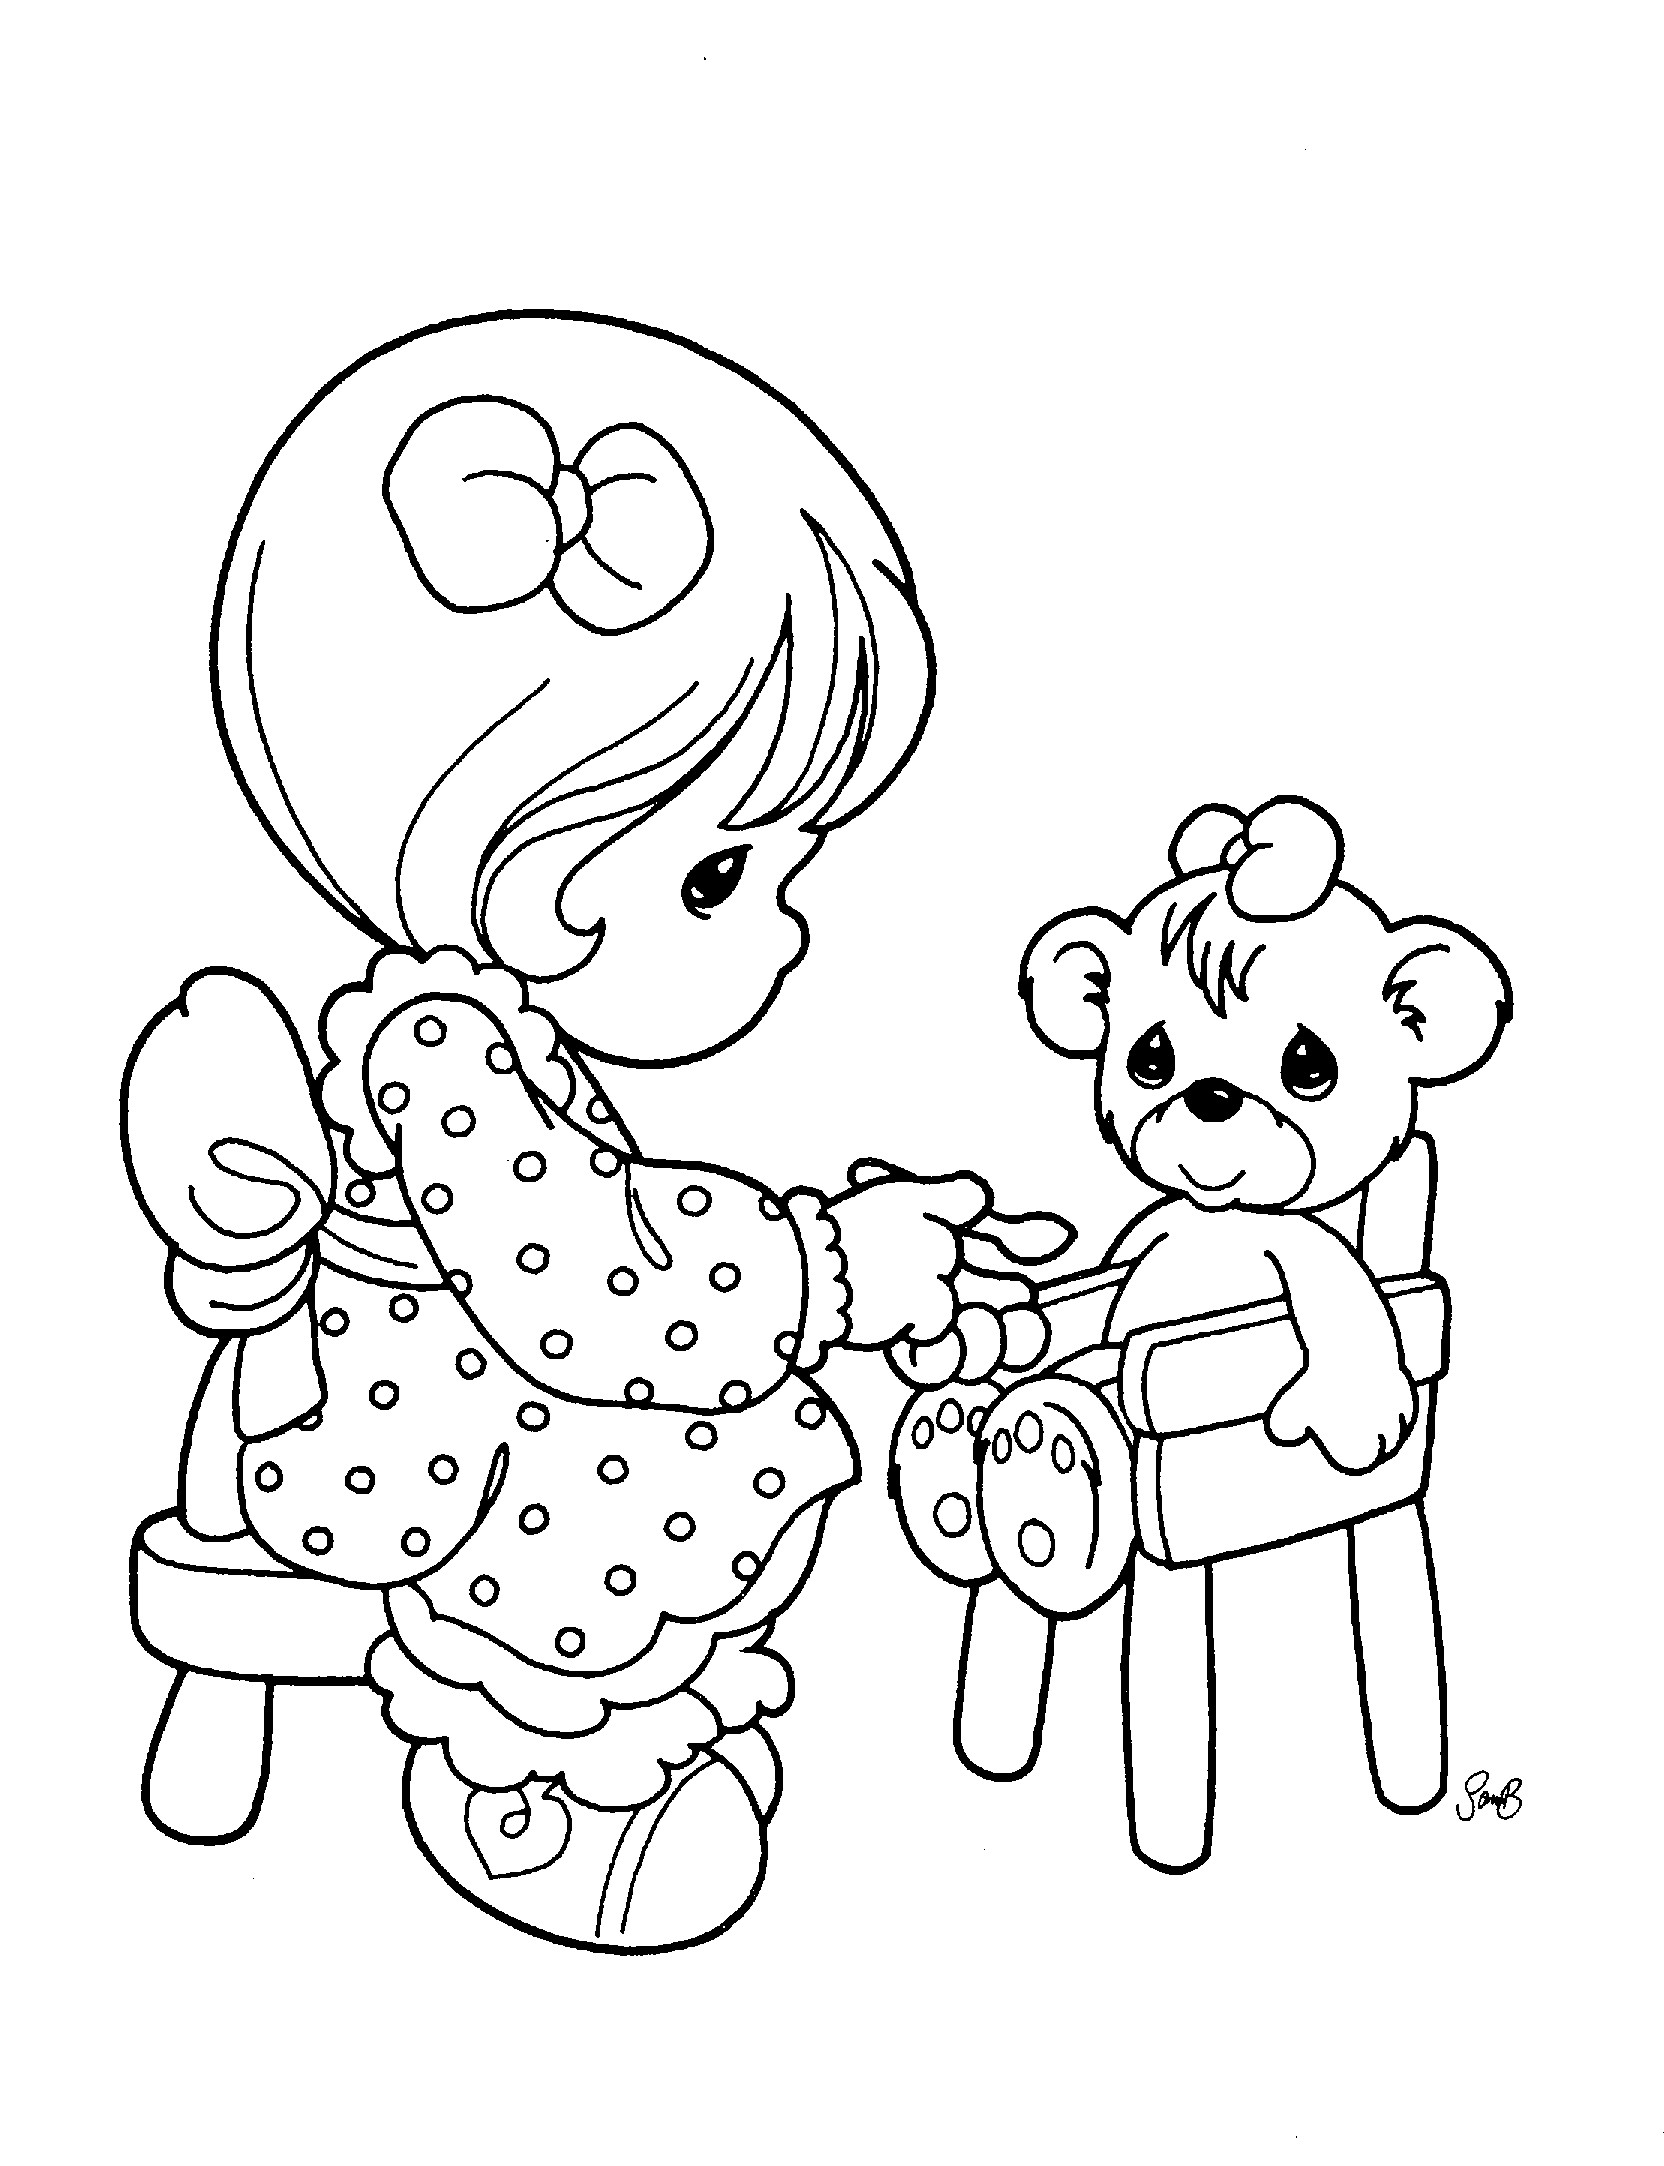 Printable Coloring Book For Kids Download
 Free Printable Precious Moments Coloring Pages For Kids